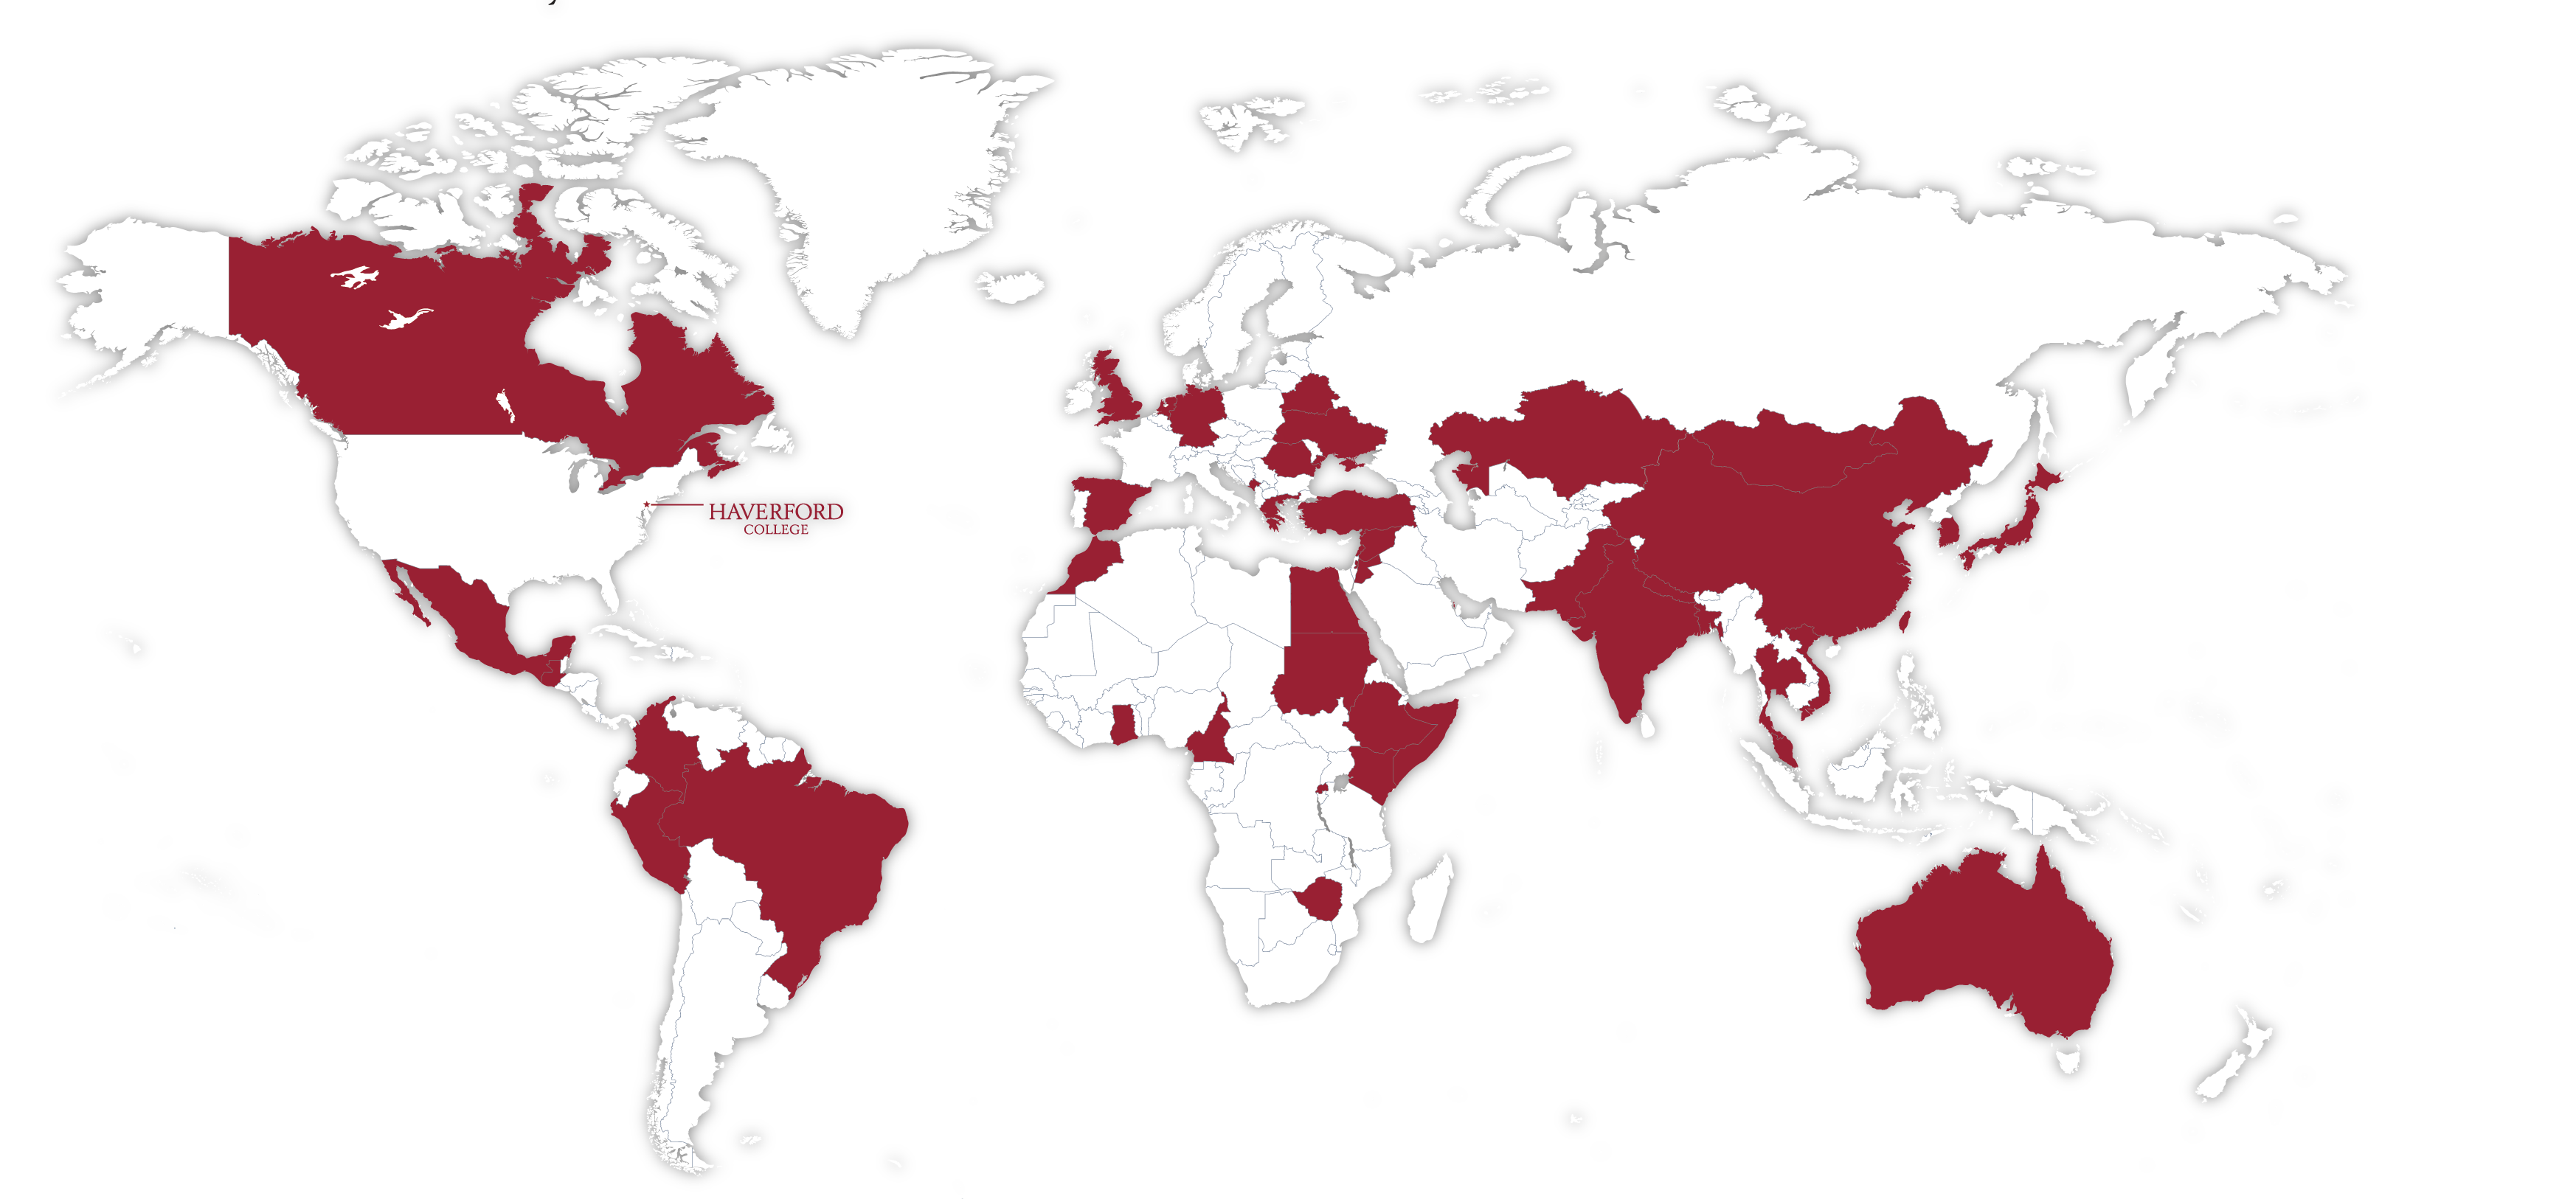 World Map showing countries that international students highlighted in red. The words Haverford College point to the location of the college.